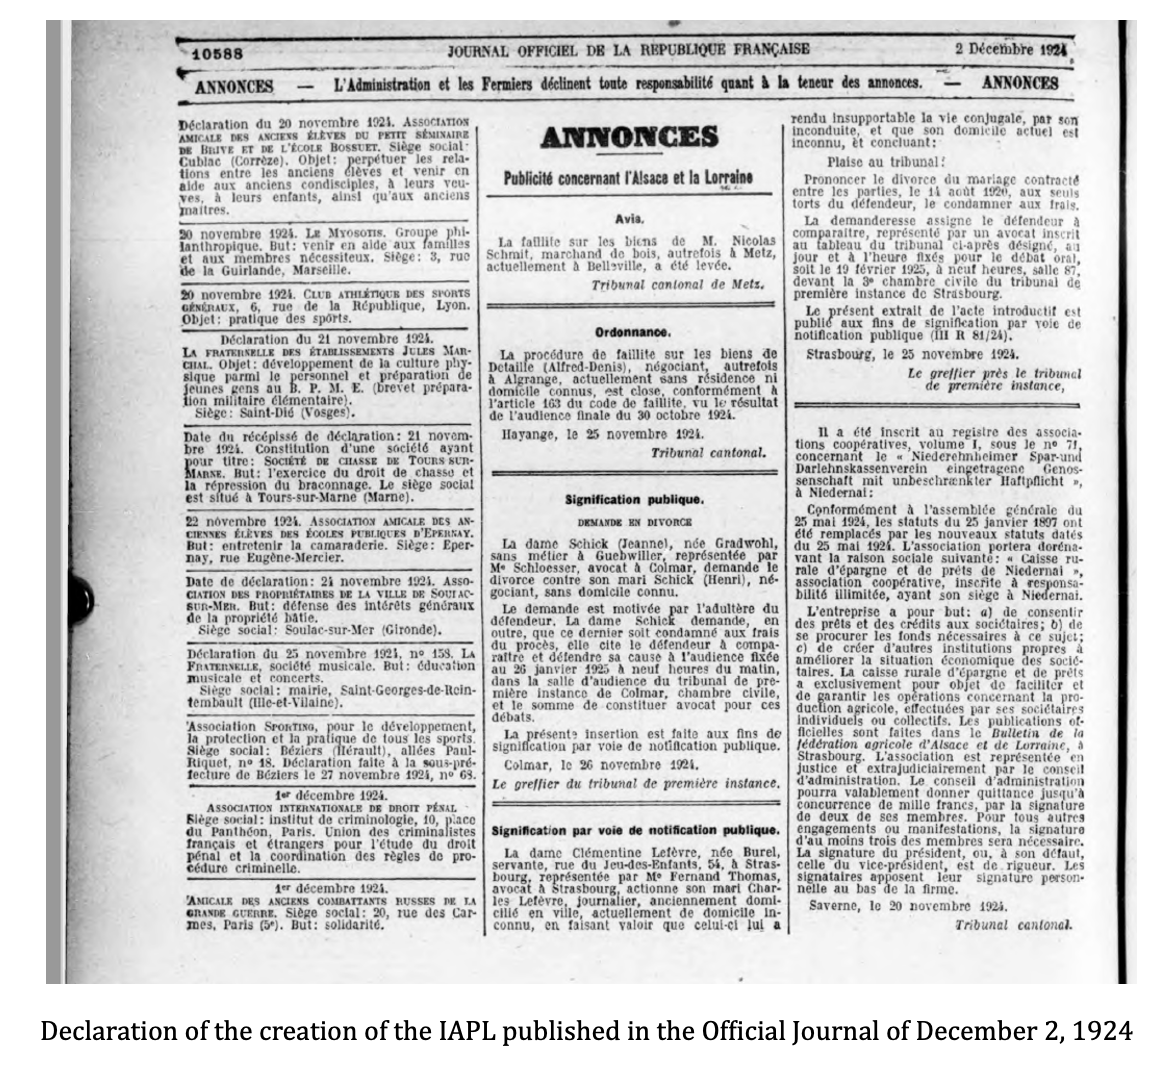 Declaration of the creation of the IAPL published in the Official Journal of December 2, 1924